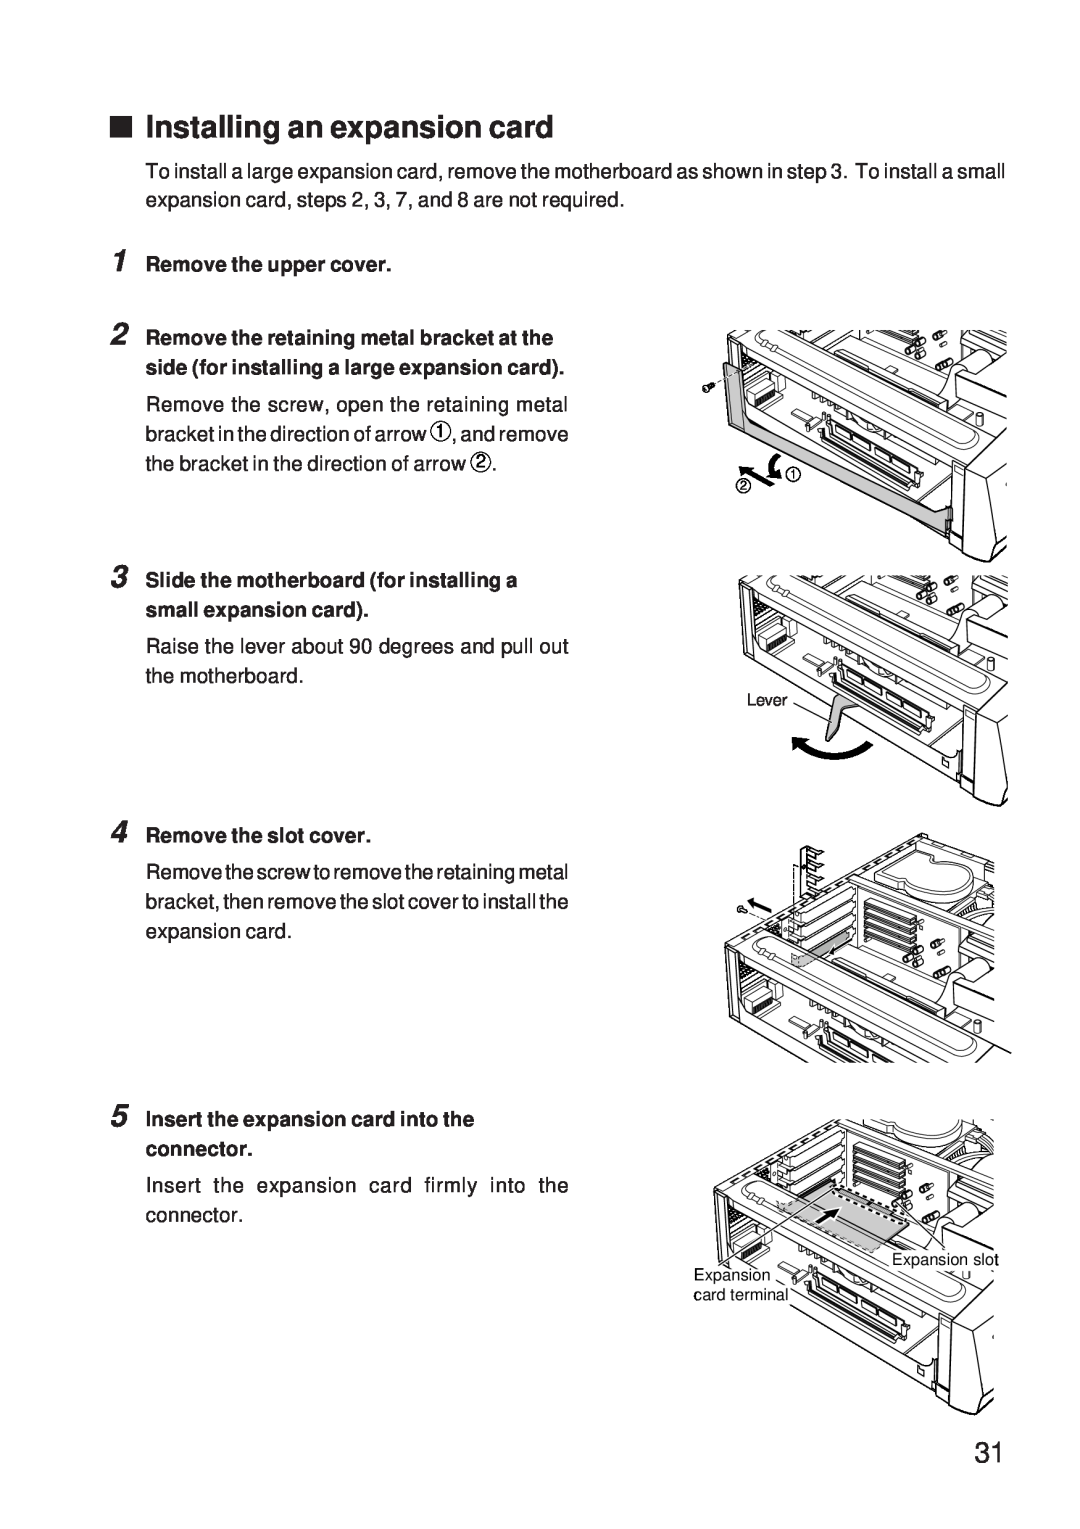 Fujitsu 5000 user manual Installing an expansion card, Slide the motherboard for installing a small expansion card 